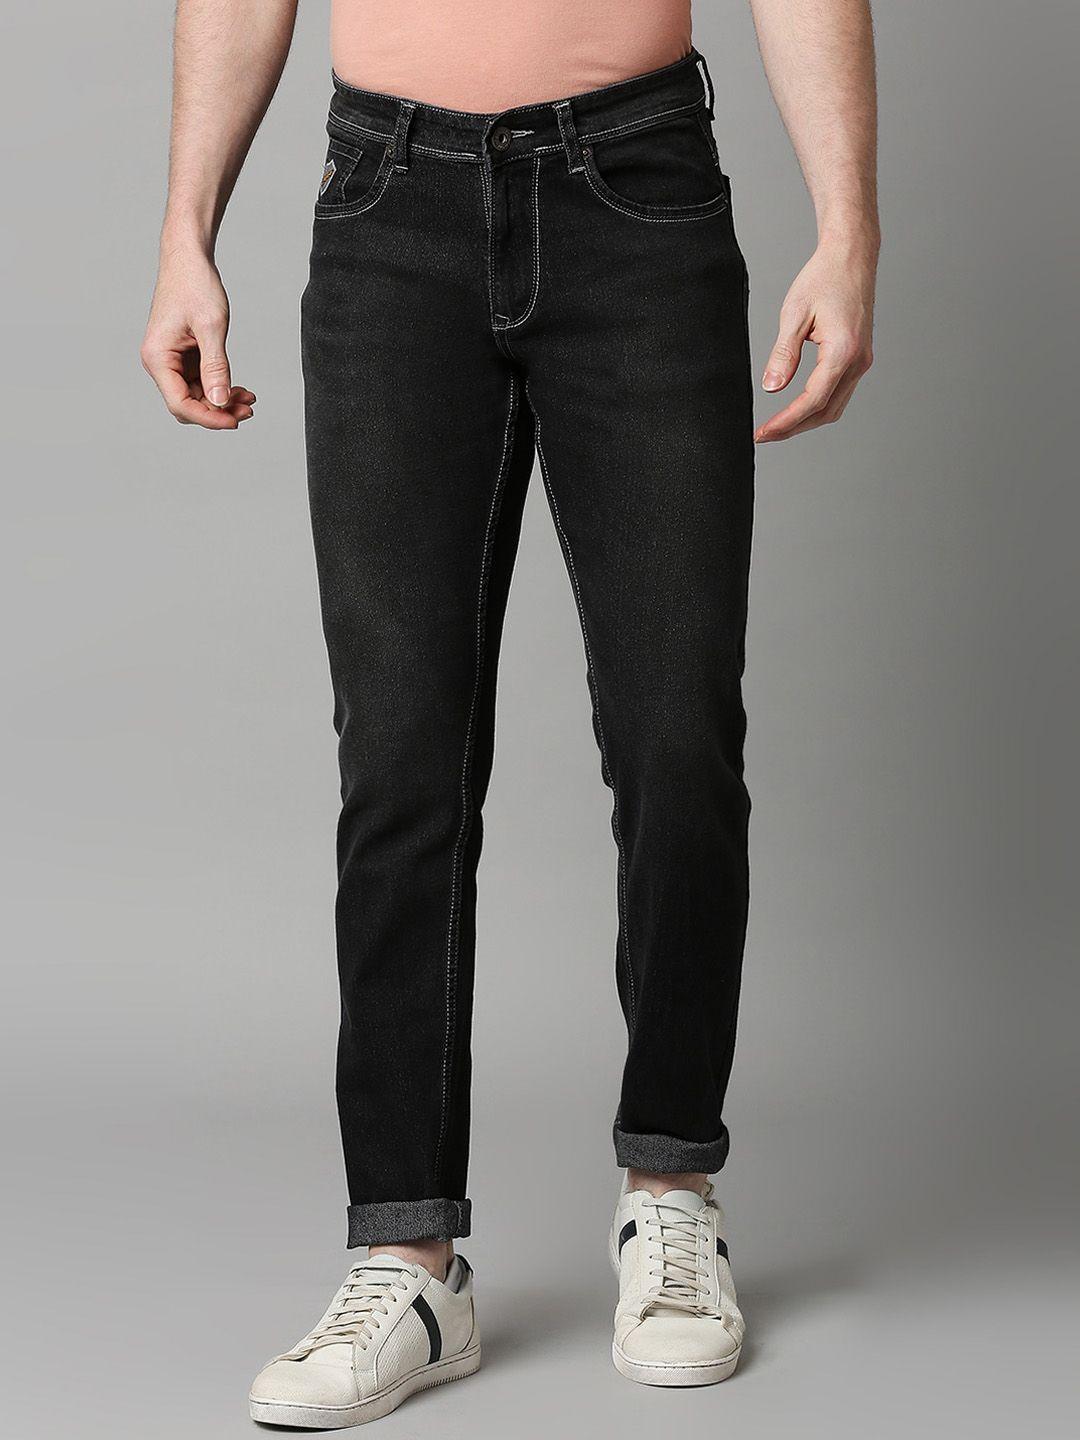 hj-hasasi-men-slim-fit-light-fade-stretchable-jeans